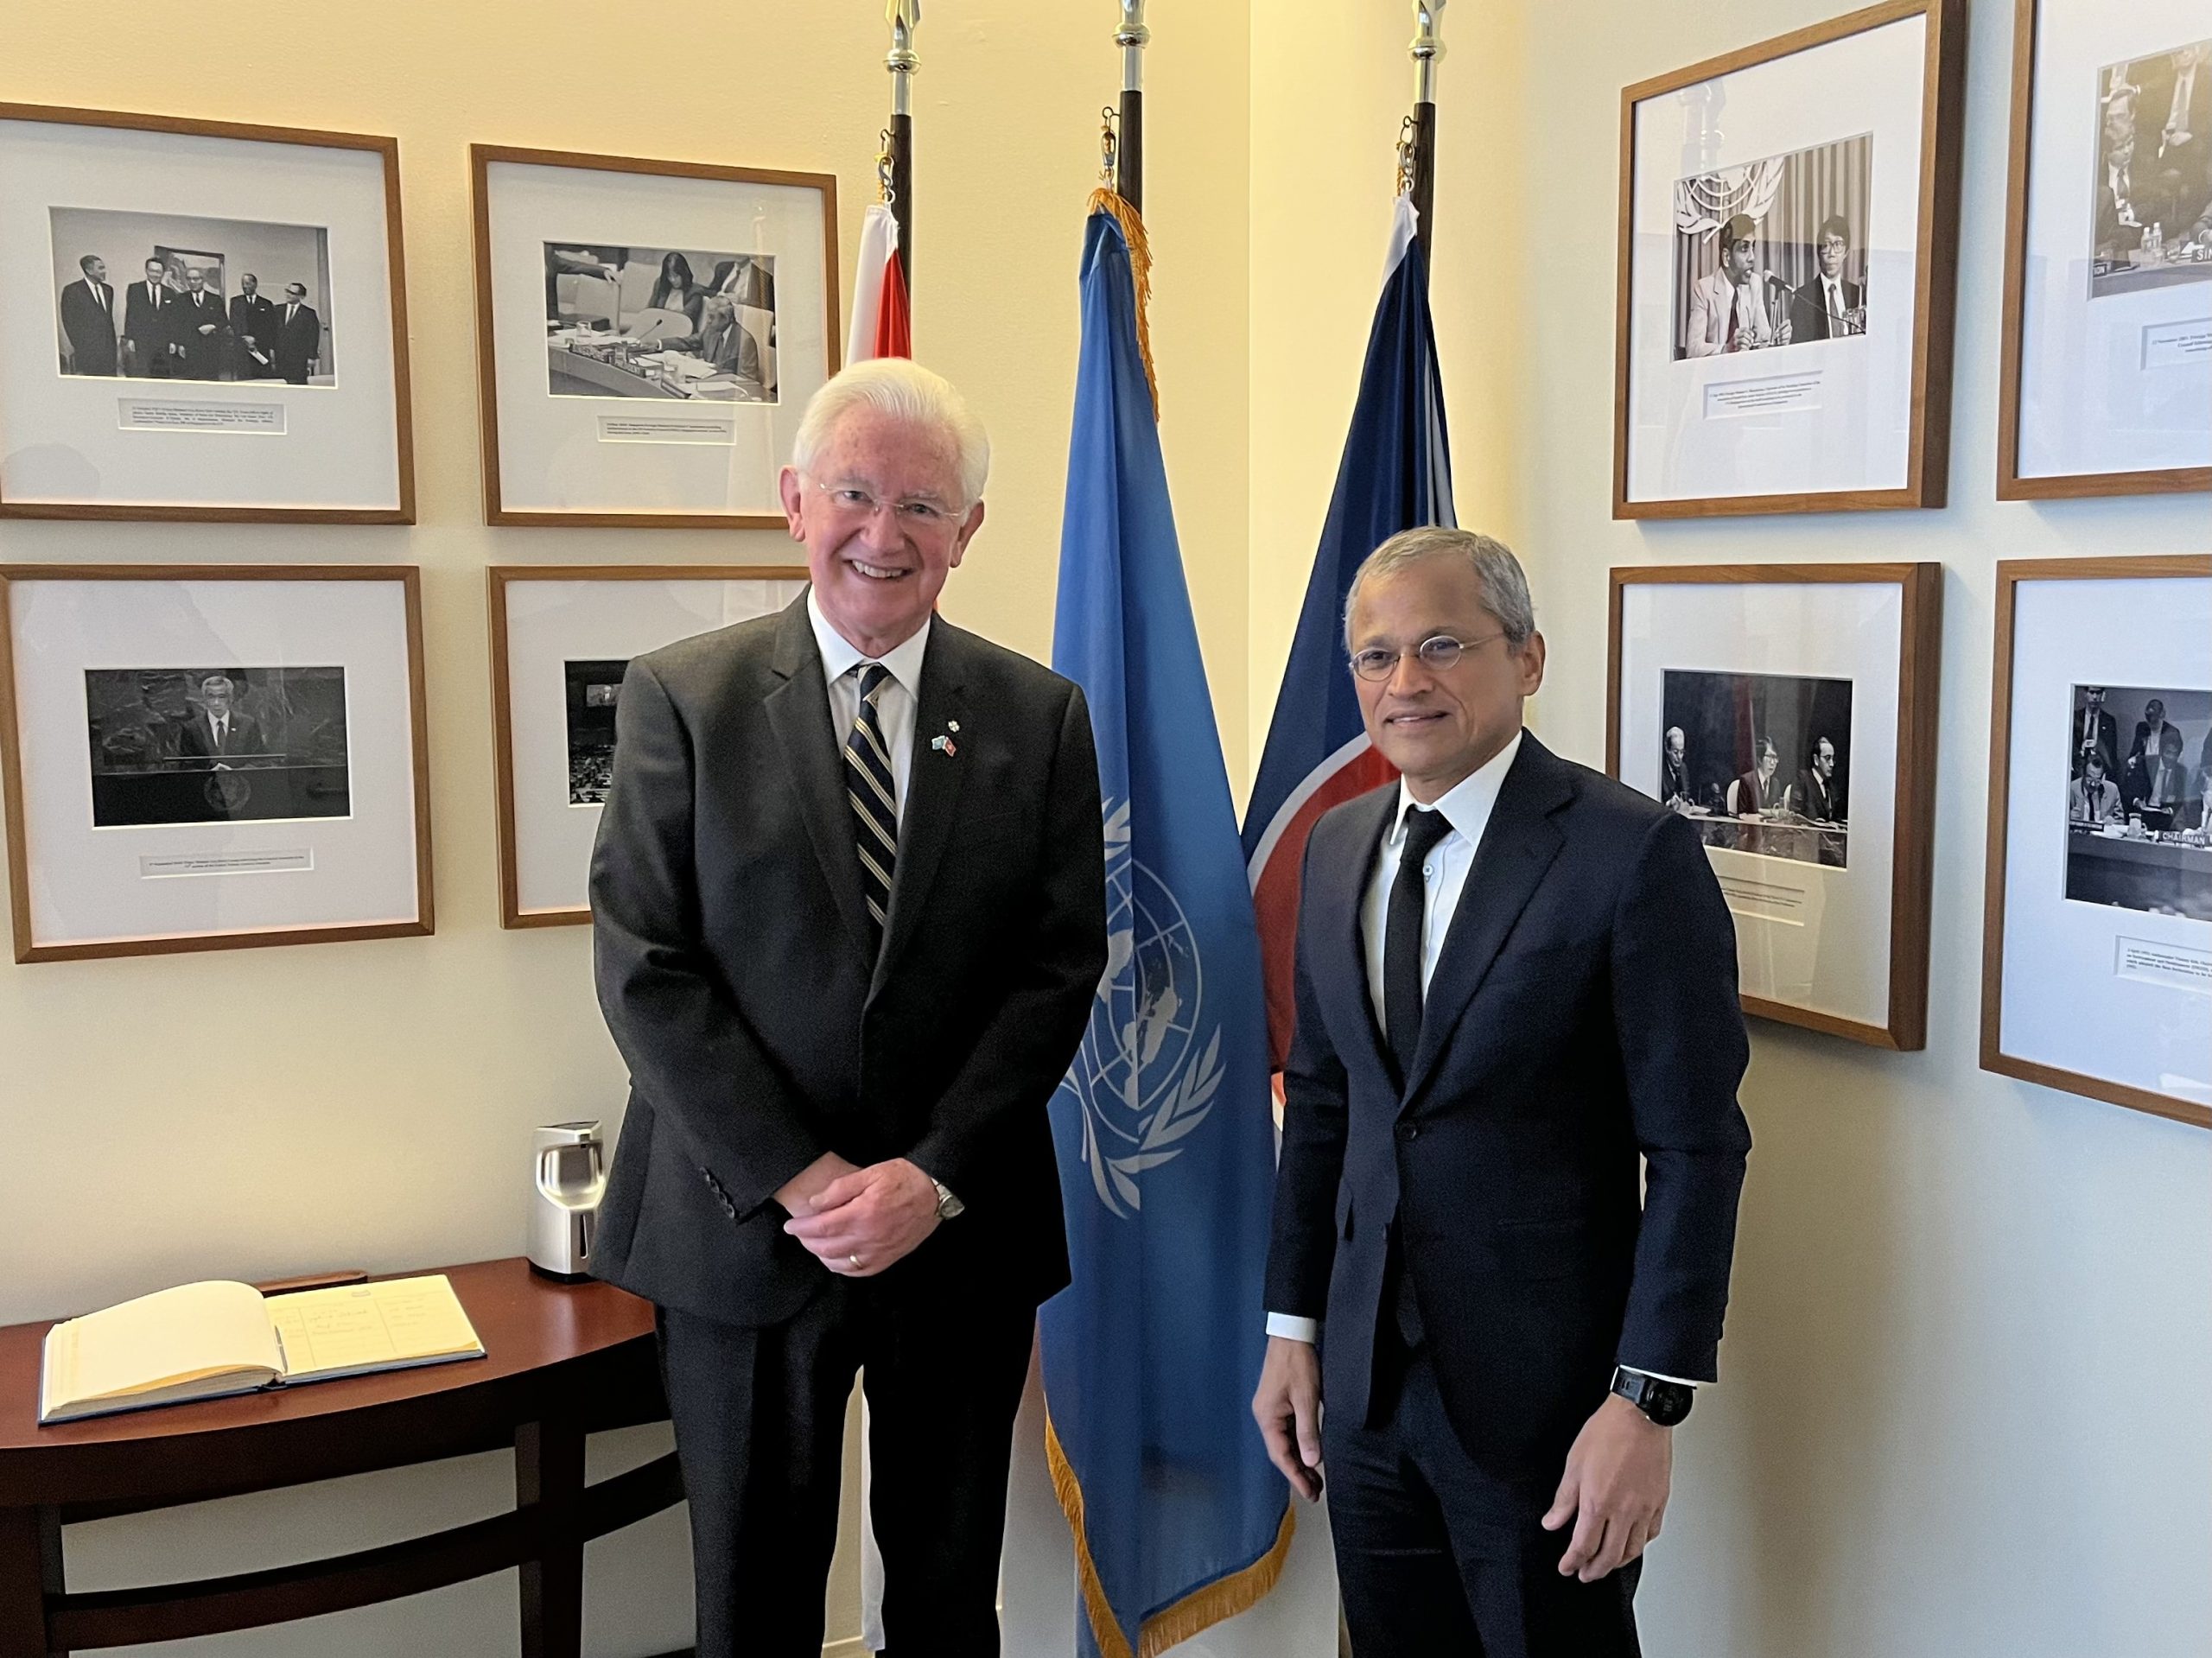 H. E. Ambassador Paul Beresford-Hill met with H.E. Ambassador Burhan Gafoor, the Permanent Representative of the Republic of Singapore to the United Nations